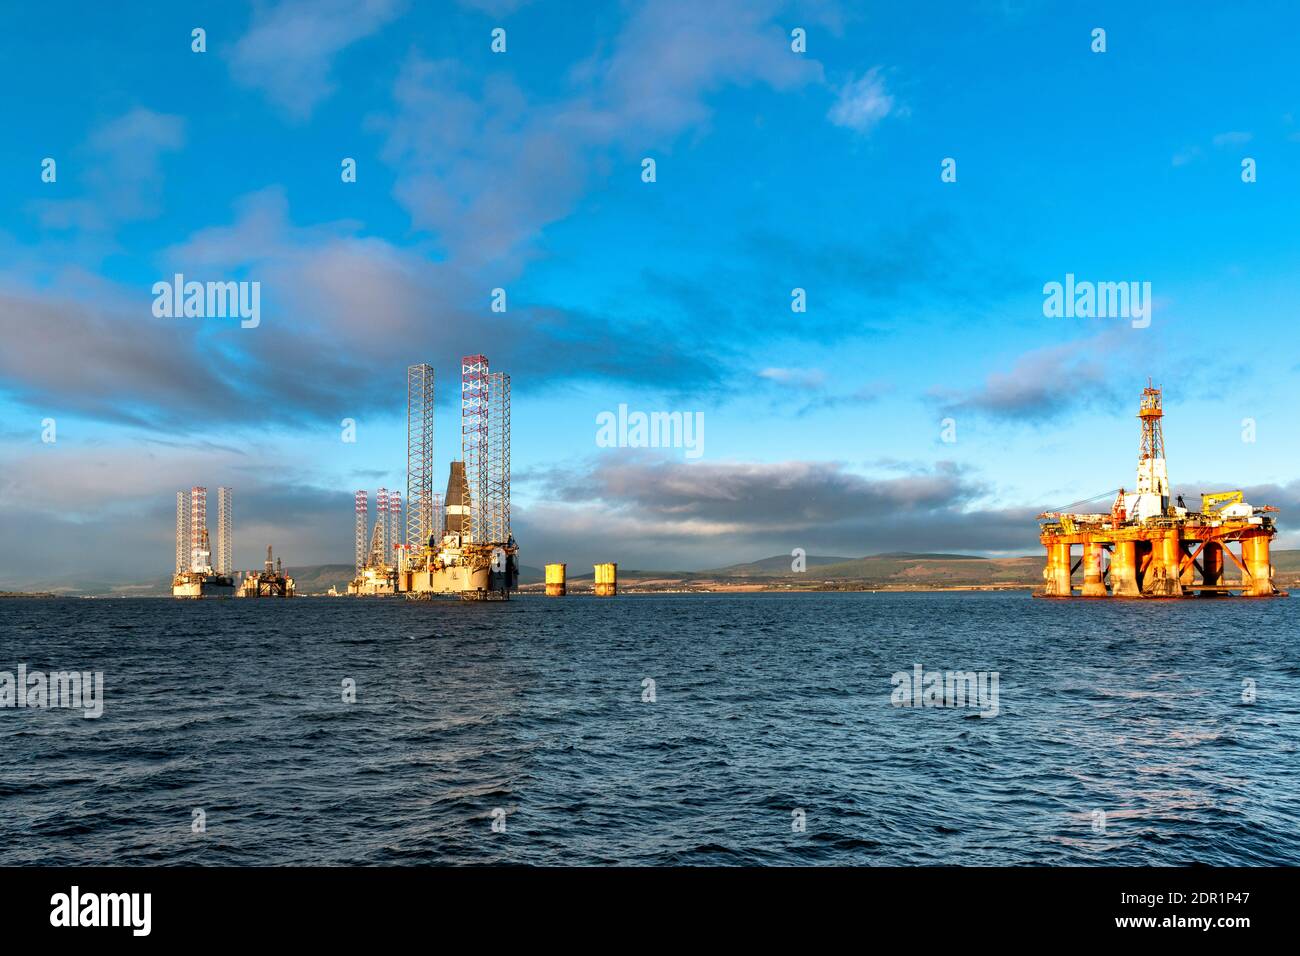 CROMARTY BLACK ISLE PENINSULAR SCOTLAND EARLY MORNING AND THE CROMARTY FIRTH WITH OIL PLATFORMS OR RIGS Stock Photo